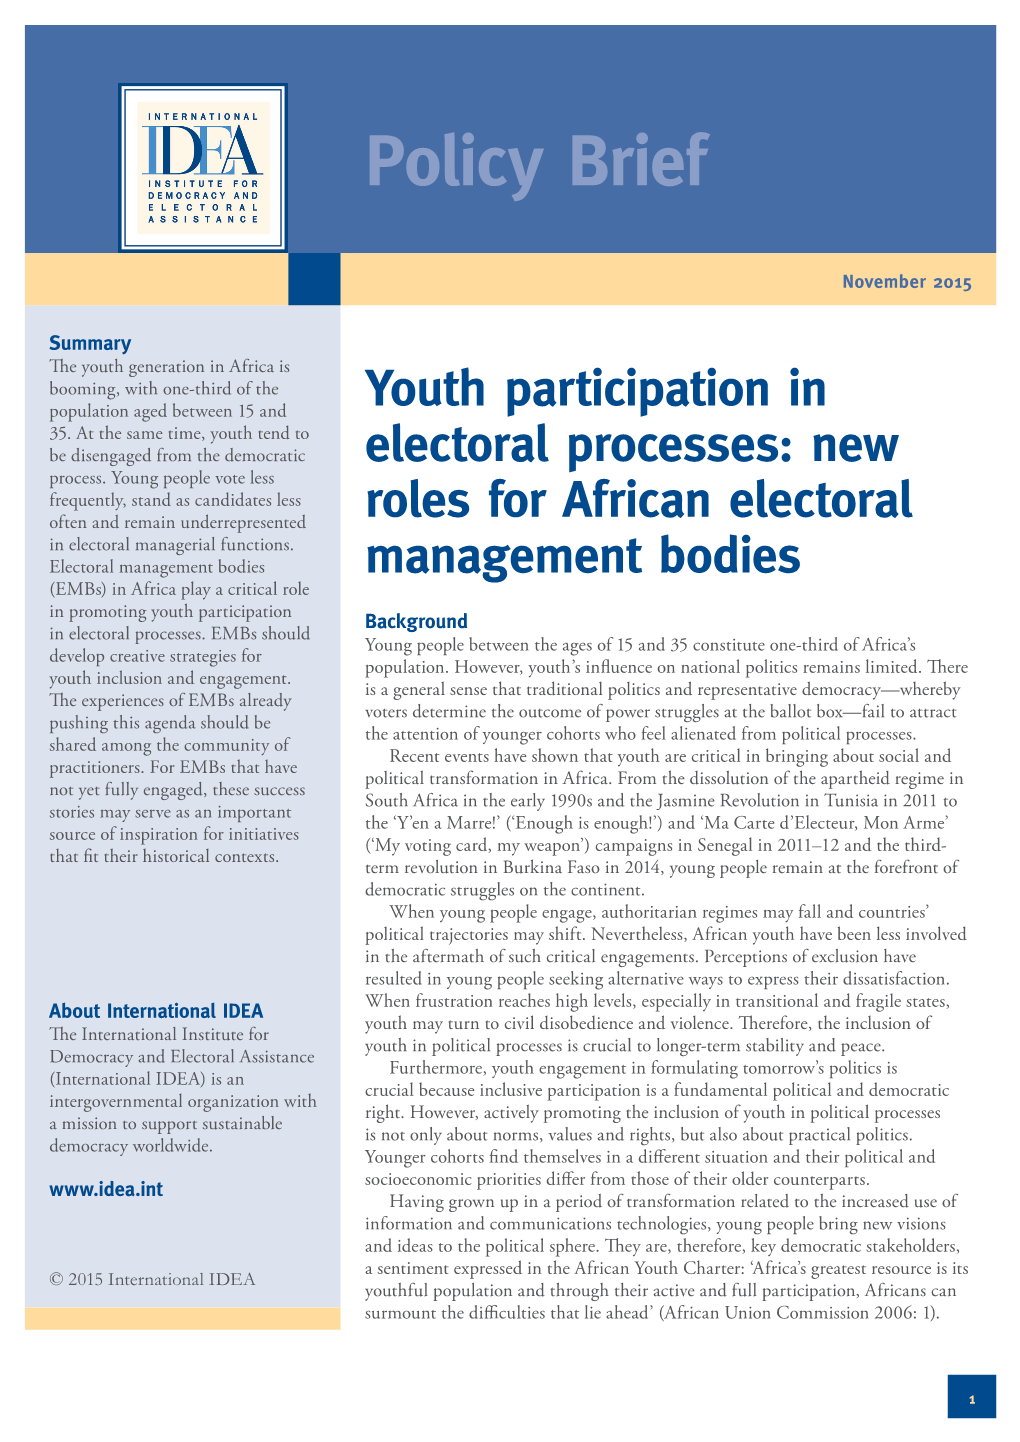 Youth Participation in Electoral Processes: New Roles for African